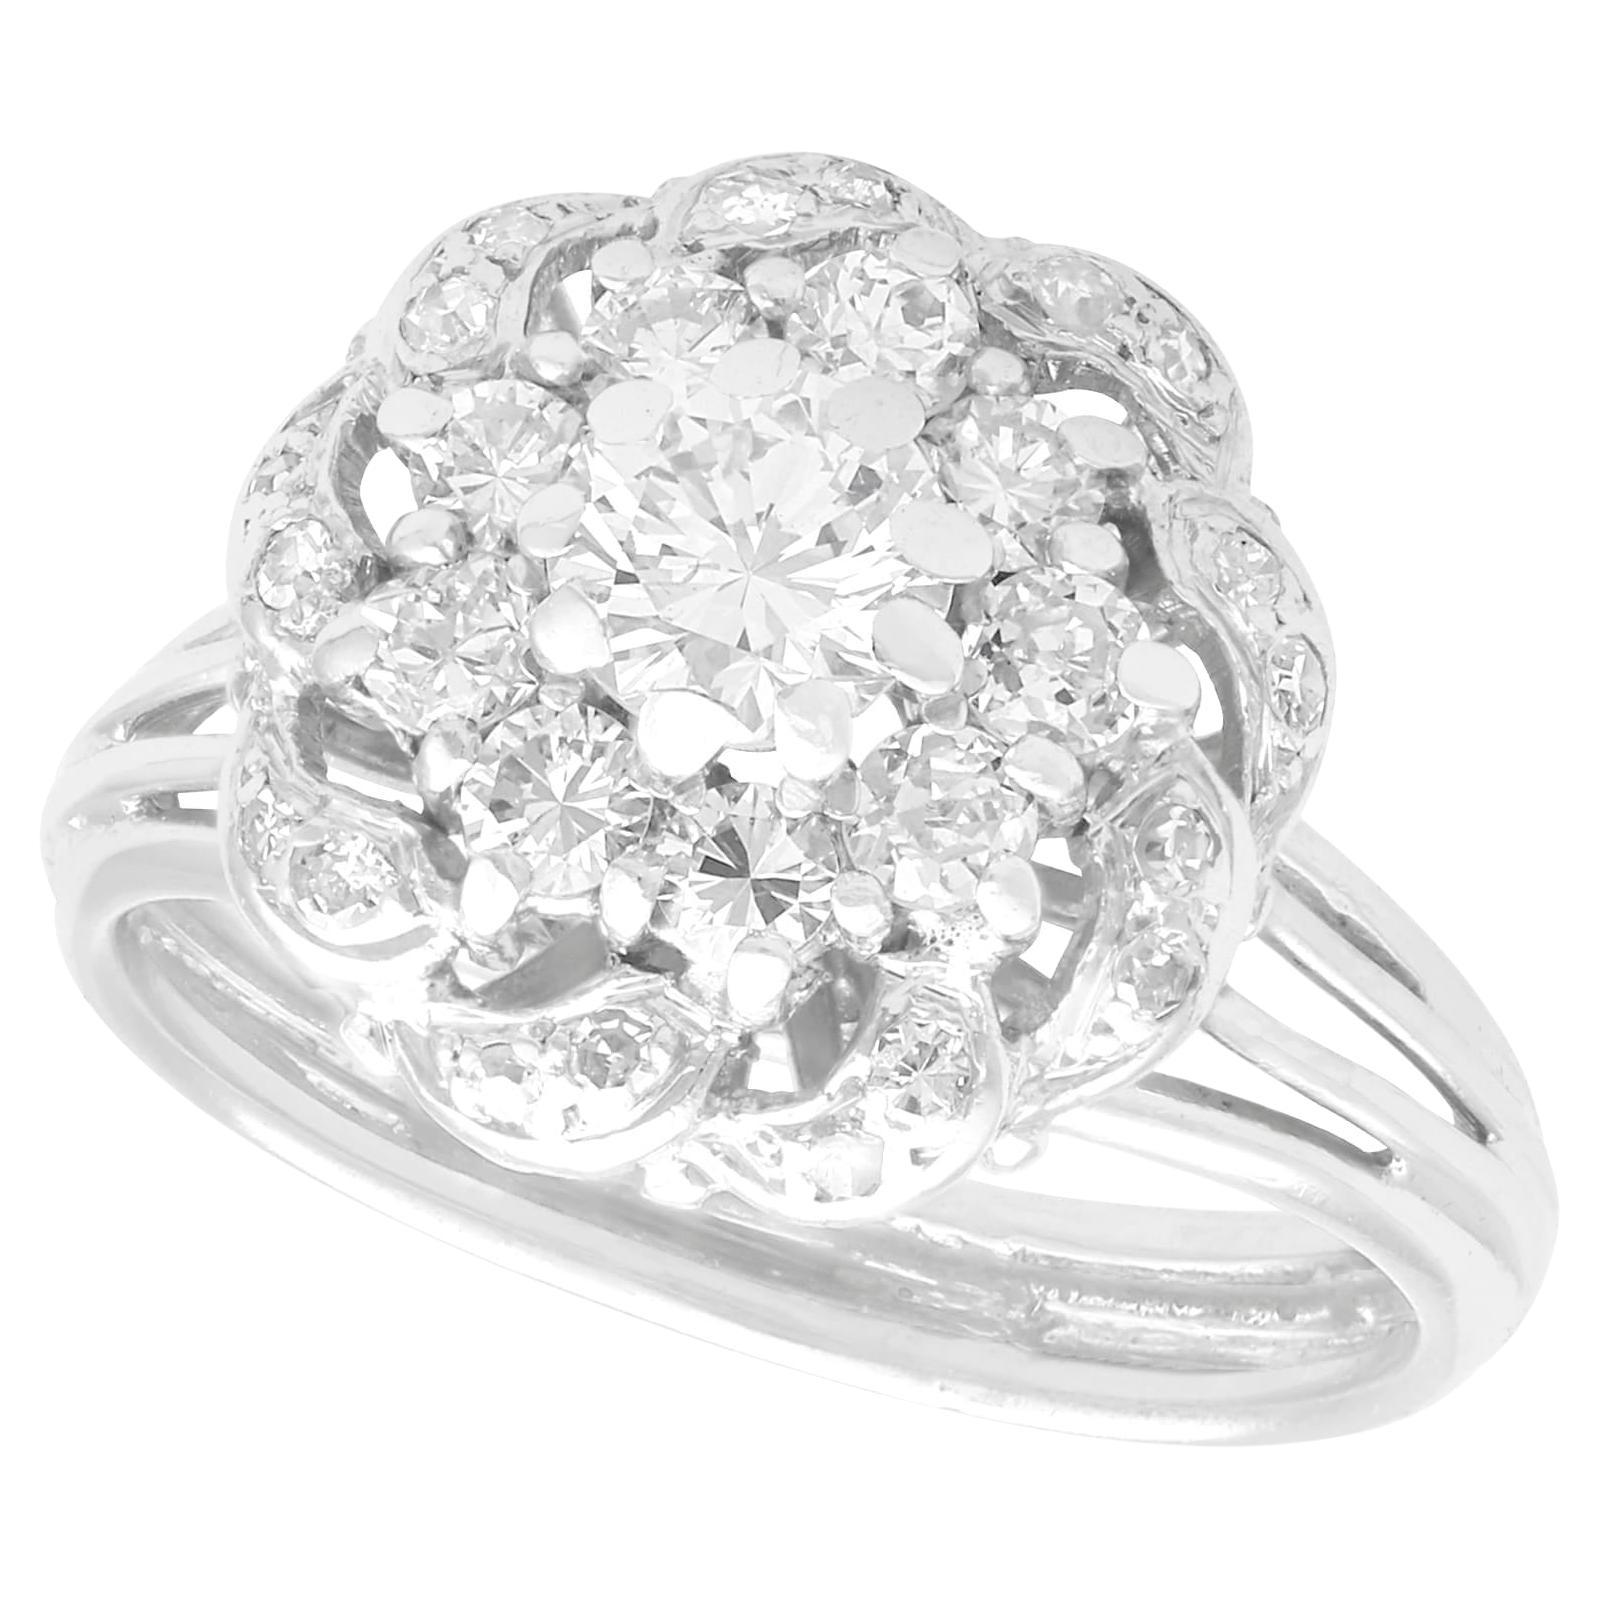 Vintage 1.39 Carat Diamond and White Gold Cluster Ring For Sale